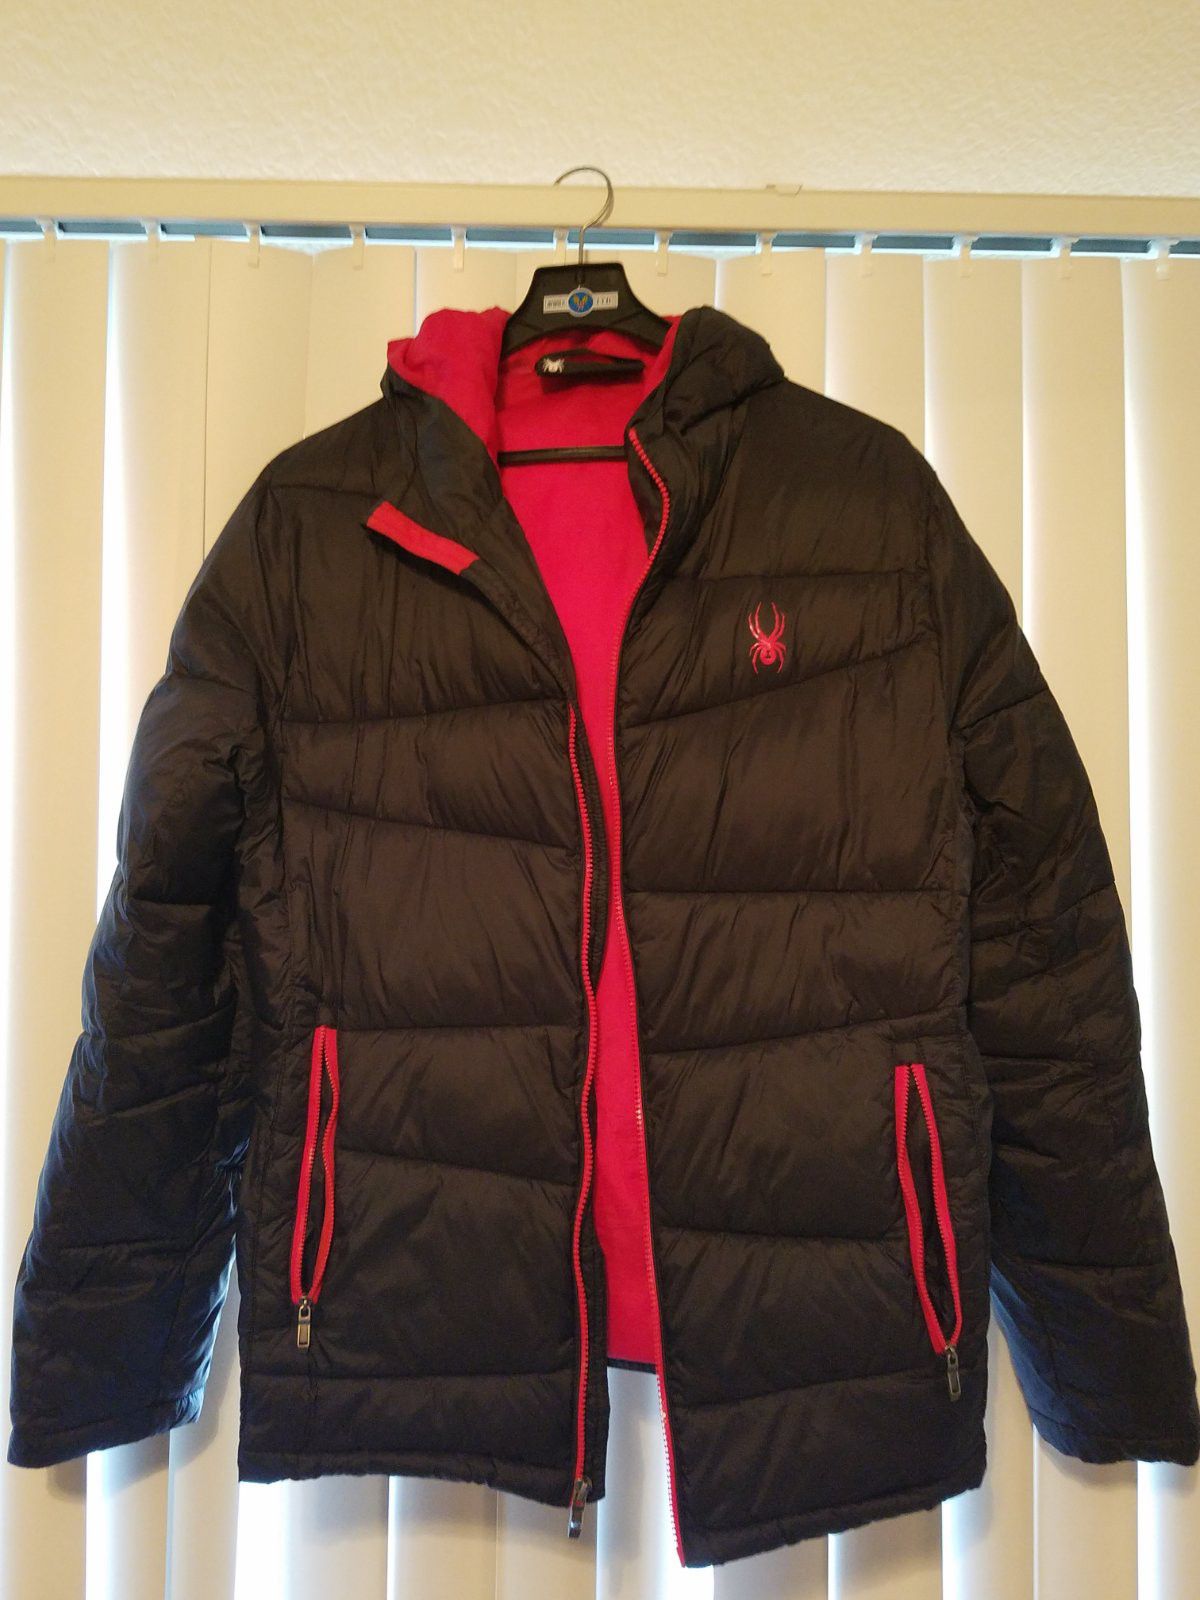 Black and red rain jacket